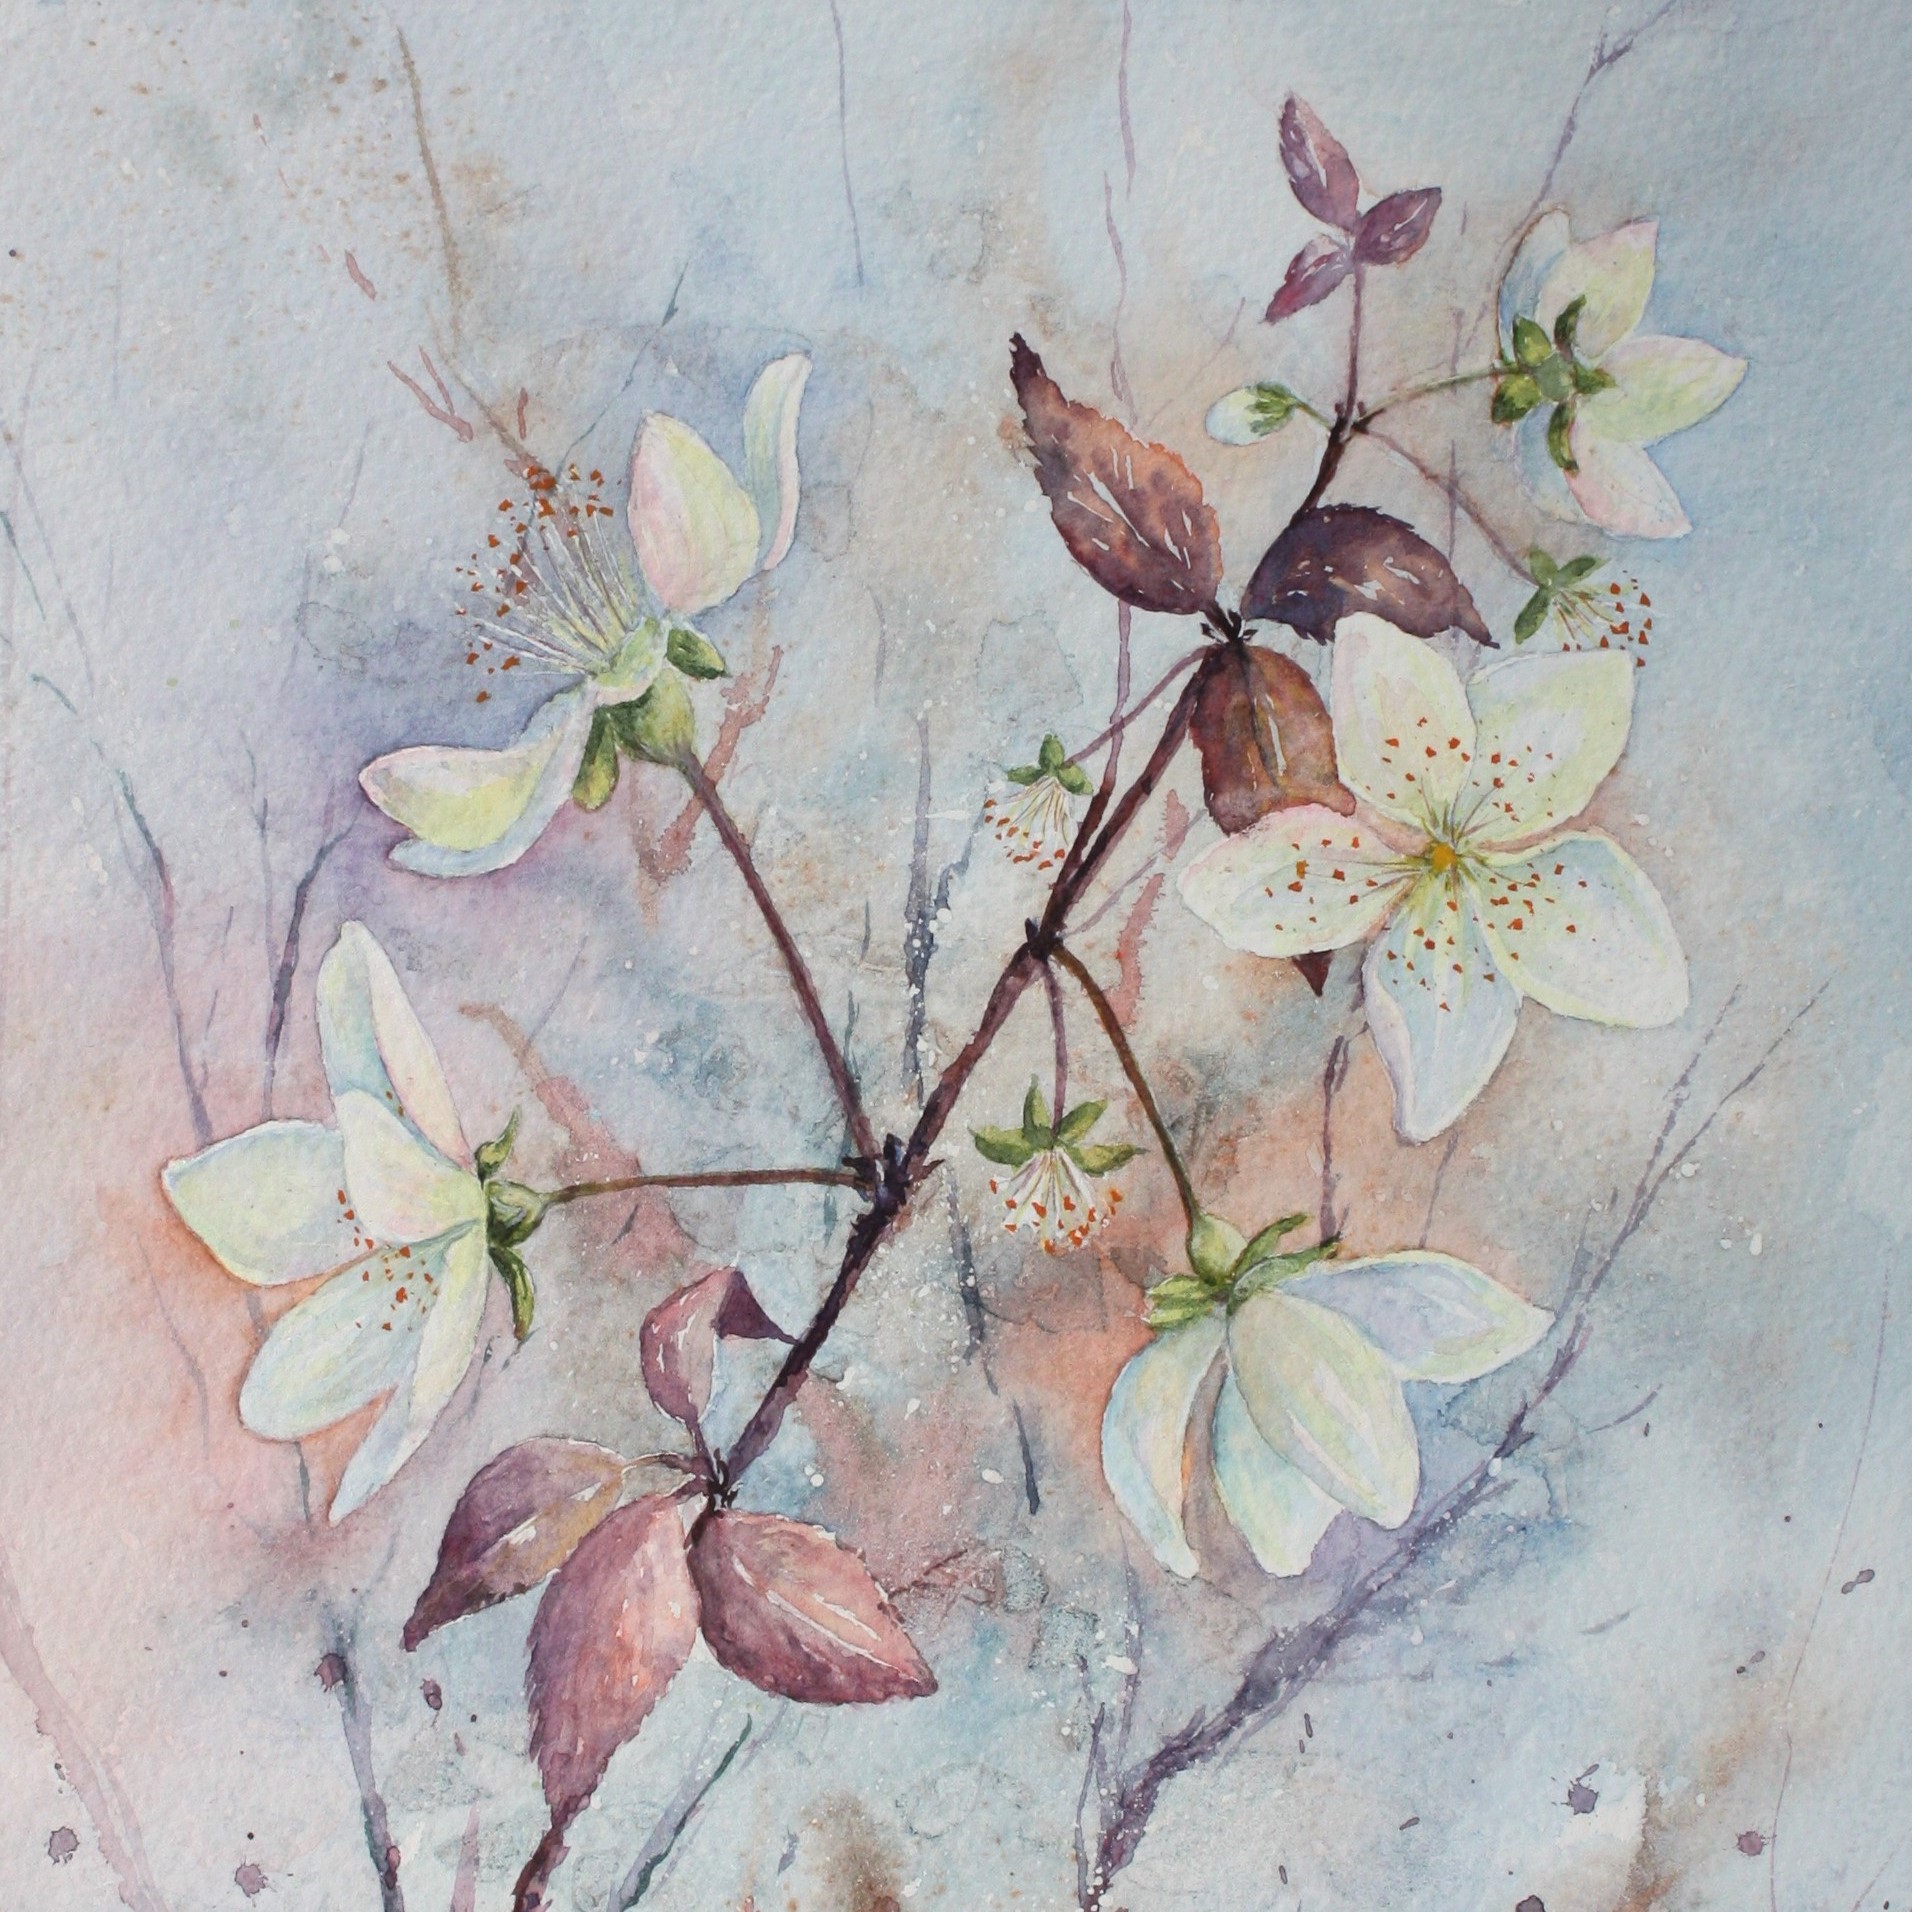 Hedgerow Blossom - a floral greetings card